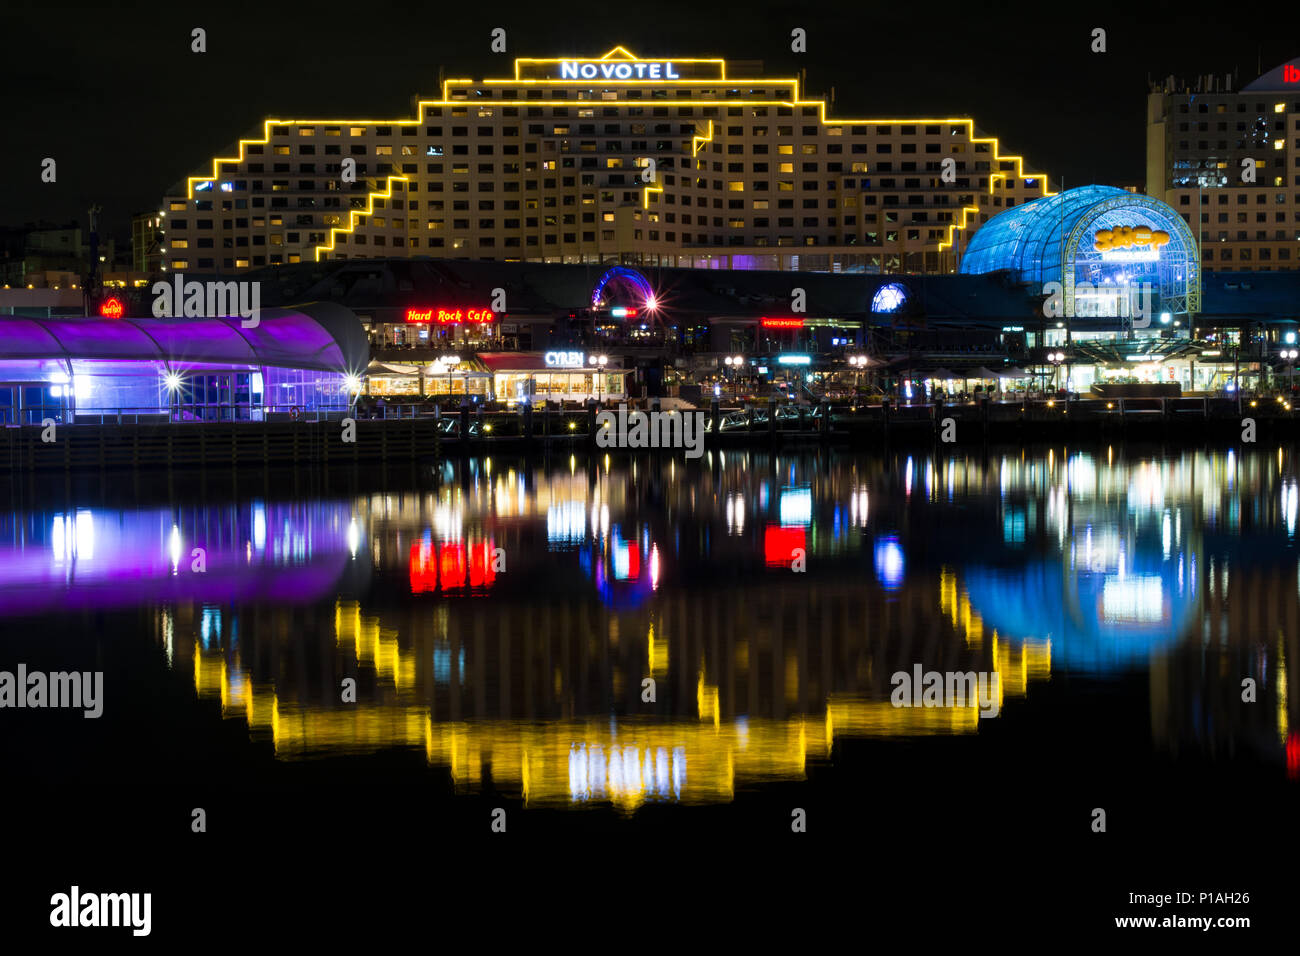 Darling Harbour at night time, Sydney, Australia Stock Photo